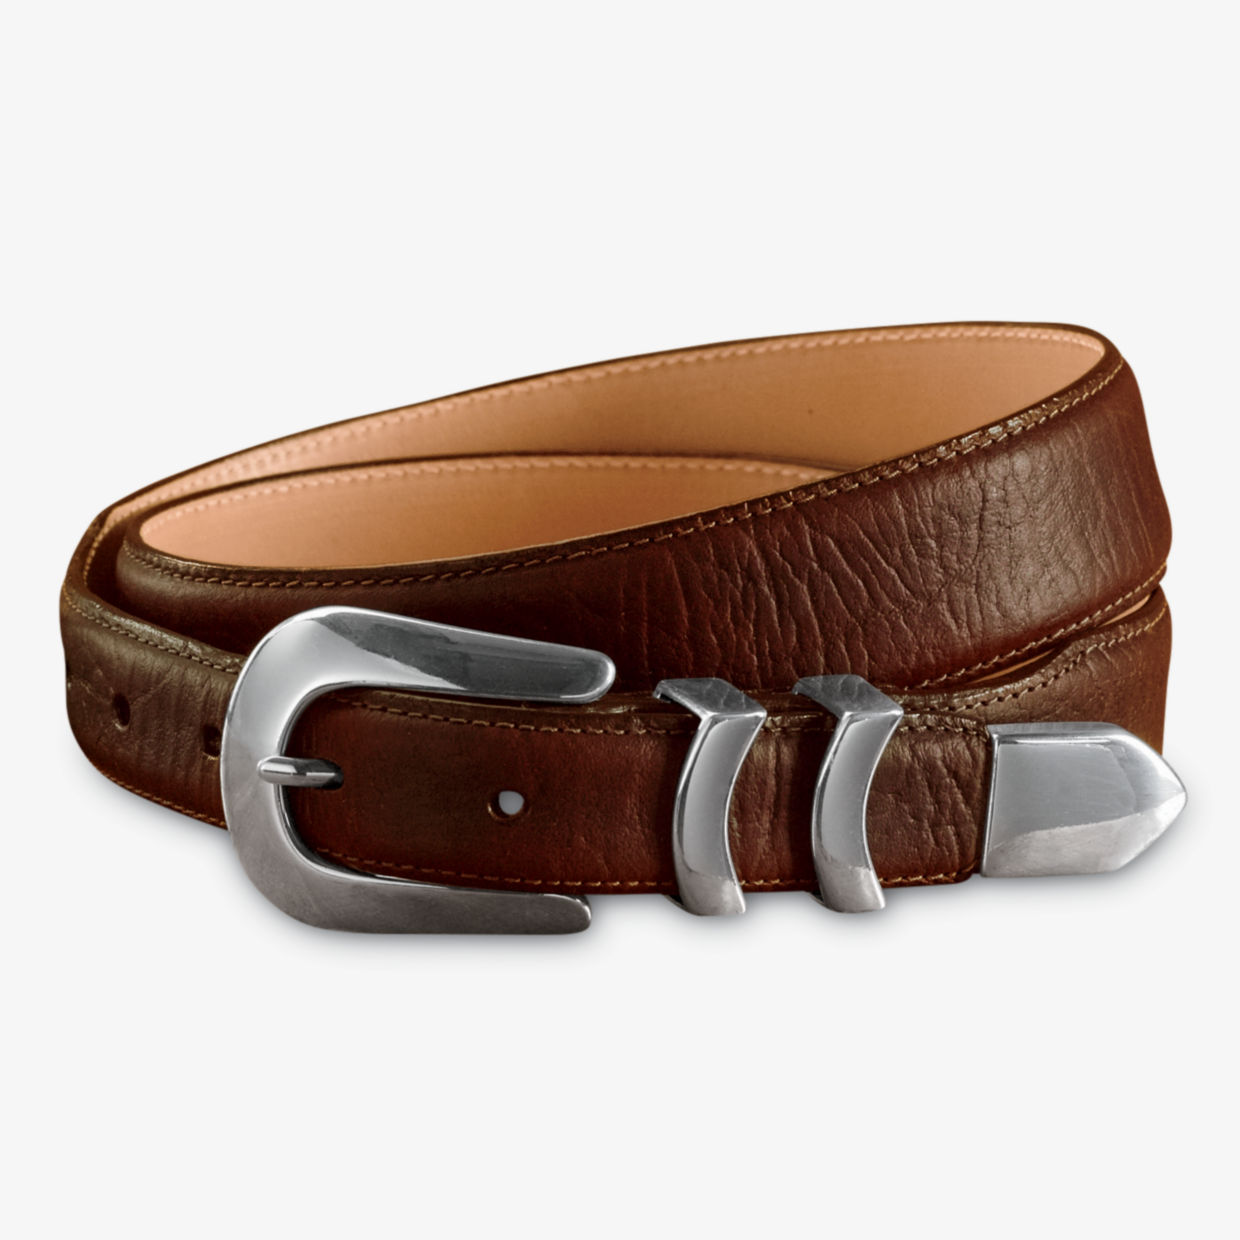 Bison Tapered-Edge Belt with Silver Buckle 